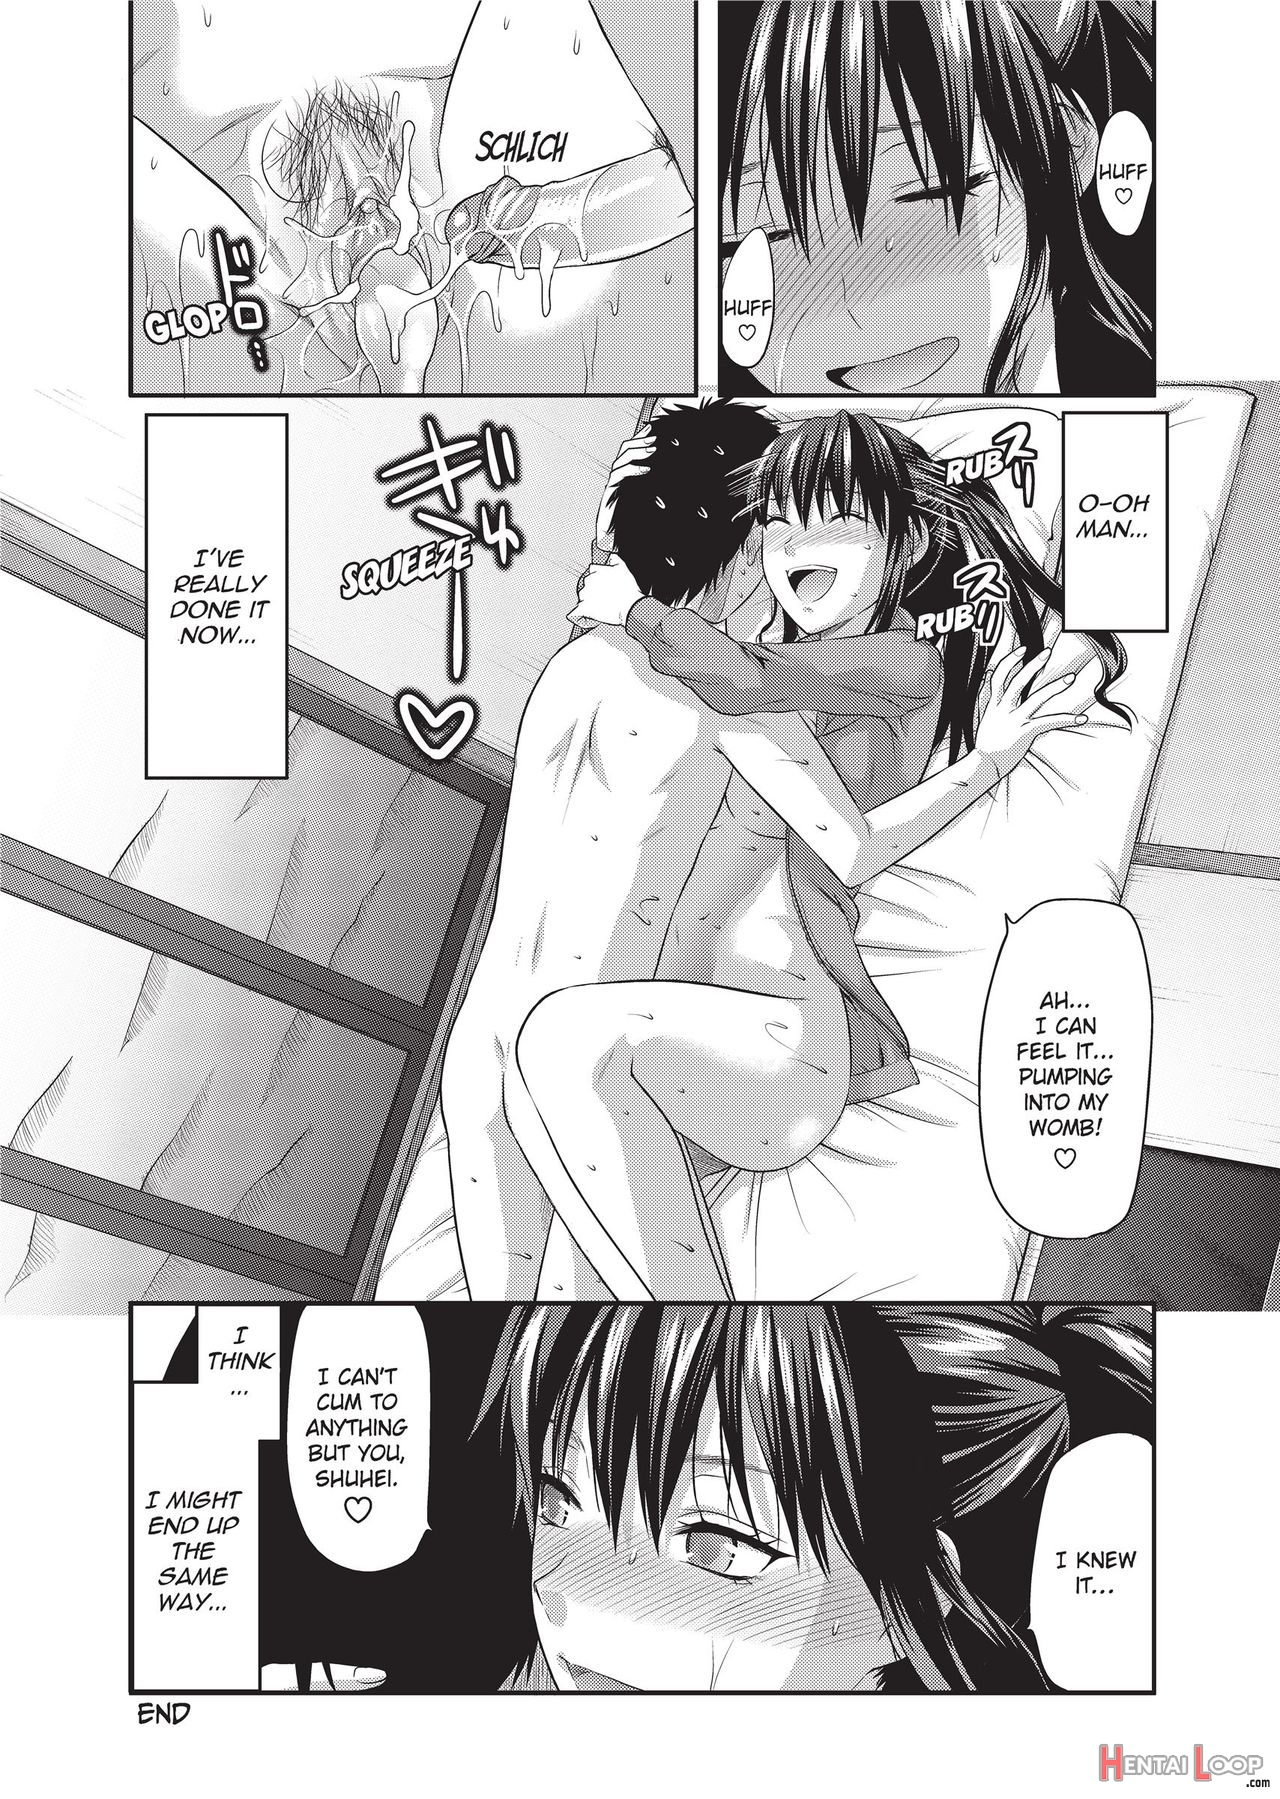 One Kore – Sweet Sister Selection page 21